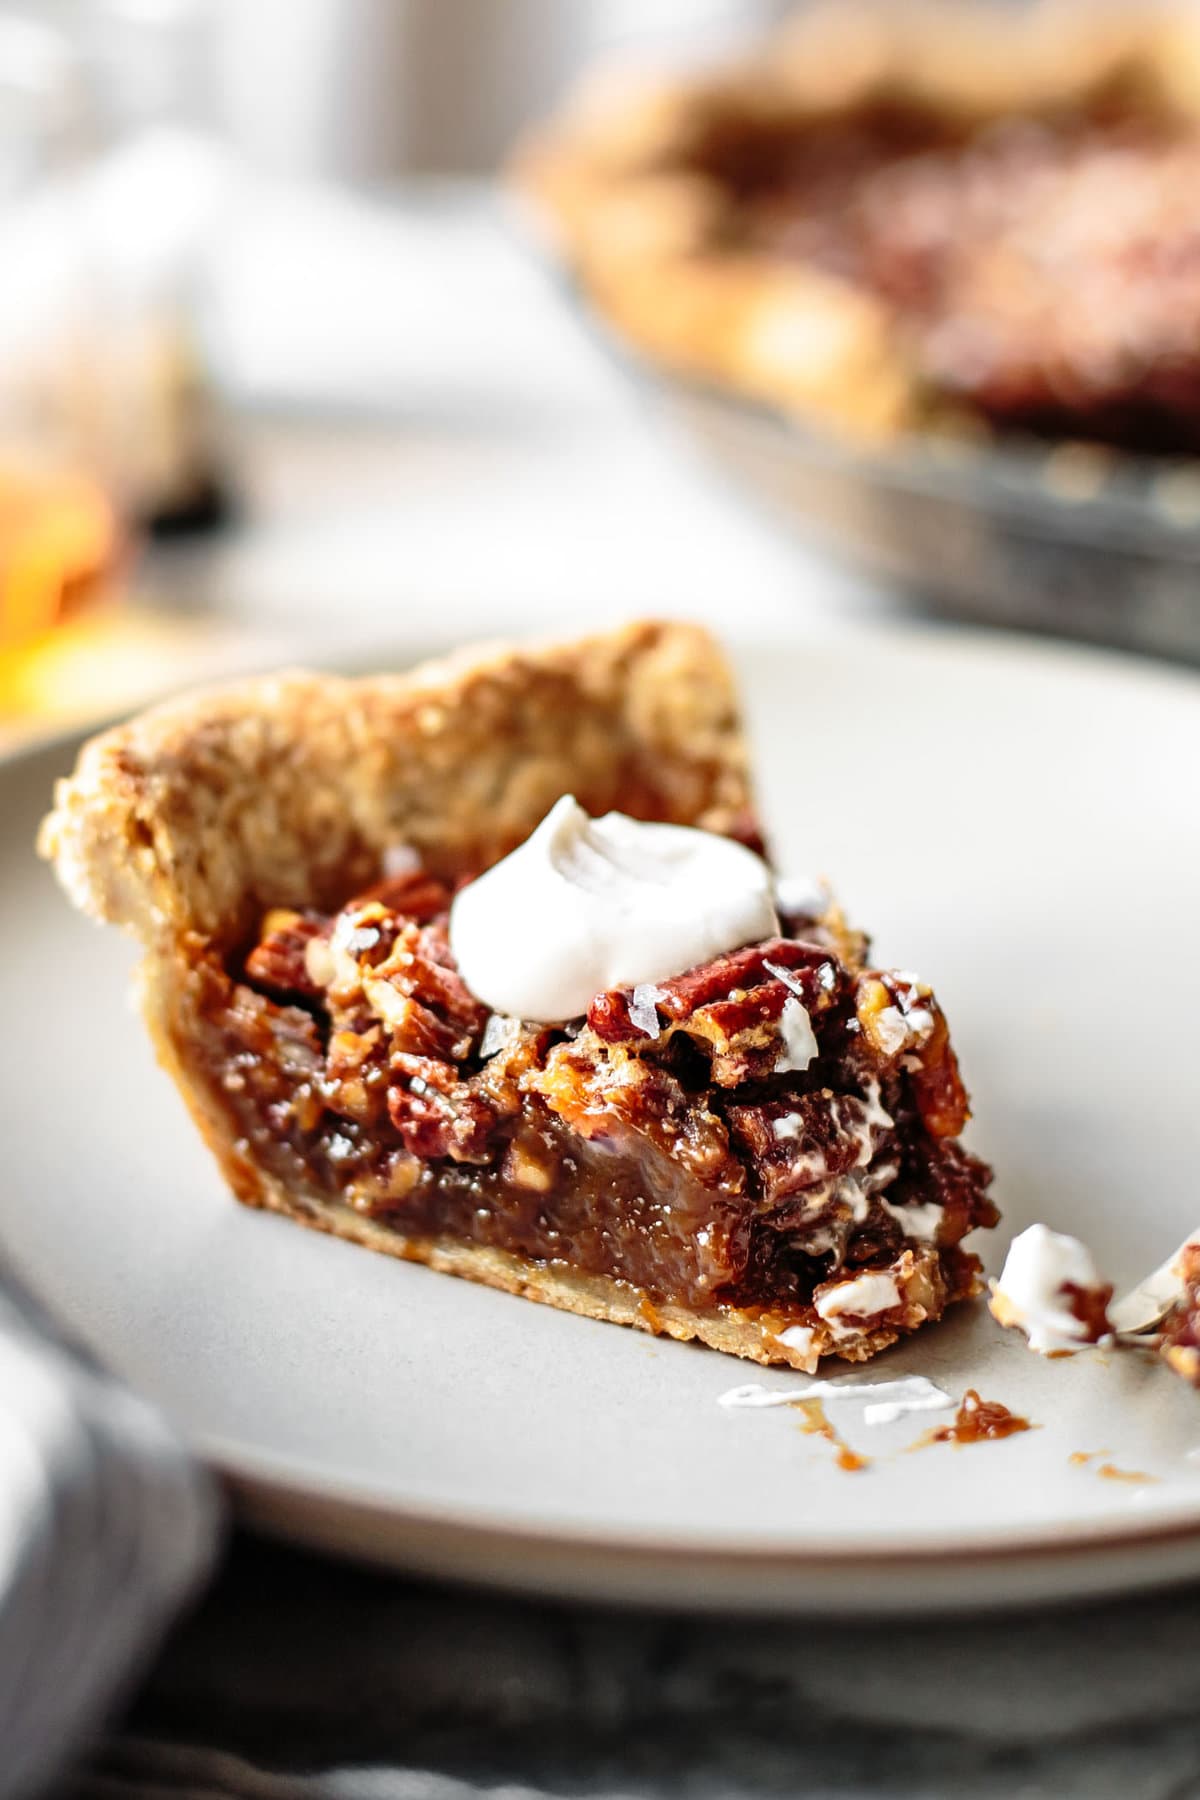 20 delicious recipes to try in your pie maker